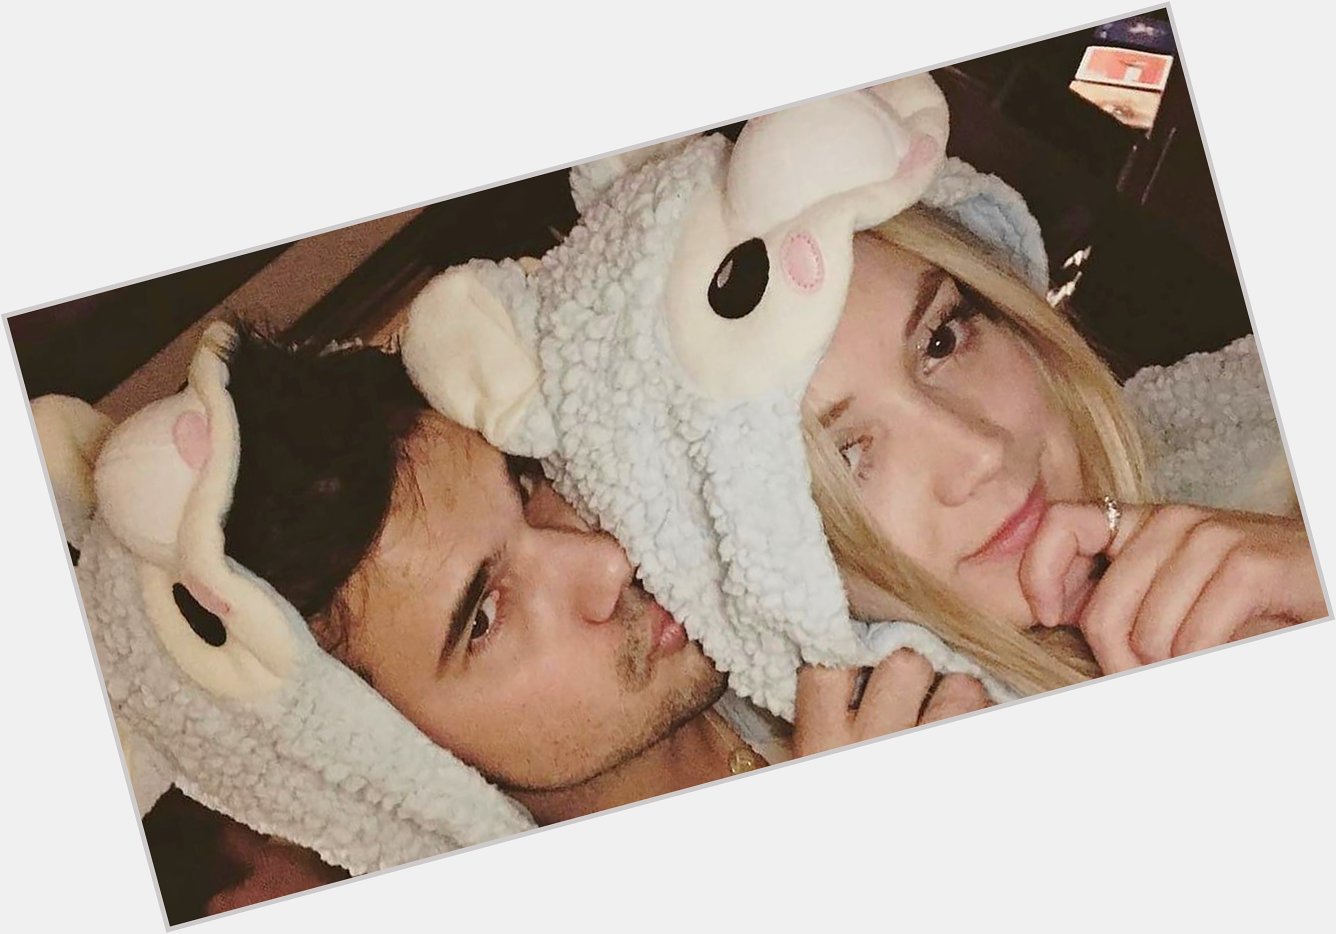 Billie Lourd and Taylor Lautner wear matching onesies as she wishes him a happy birthday:  